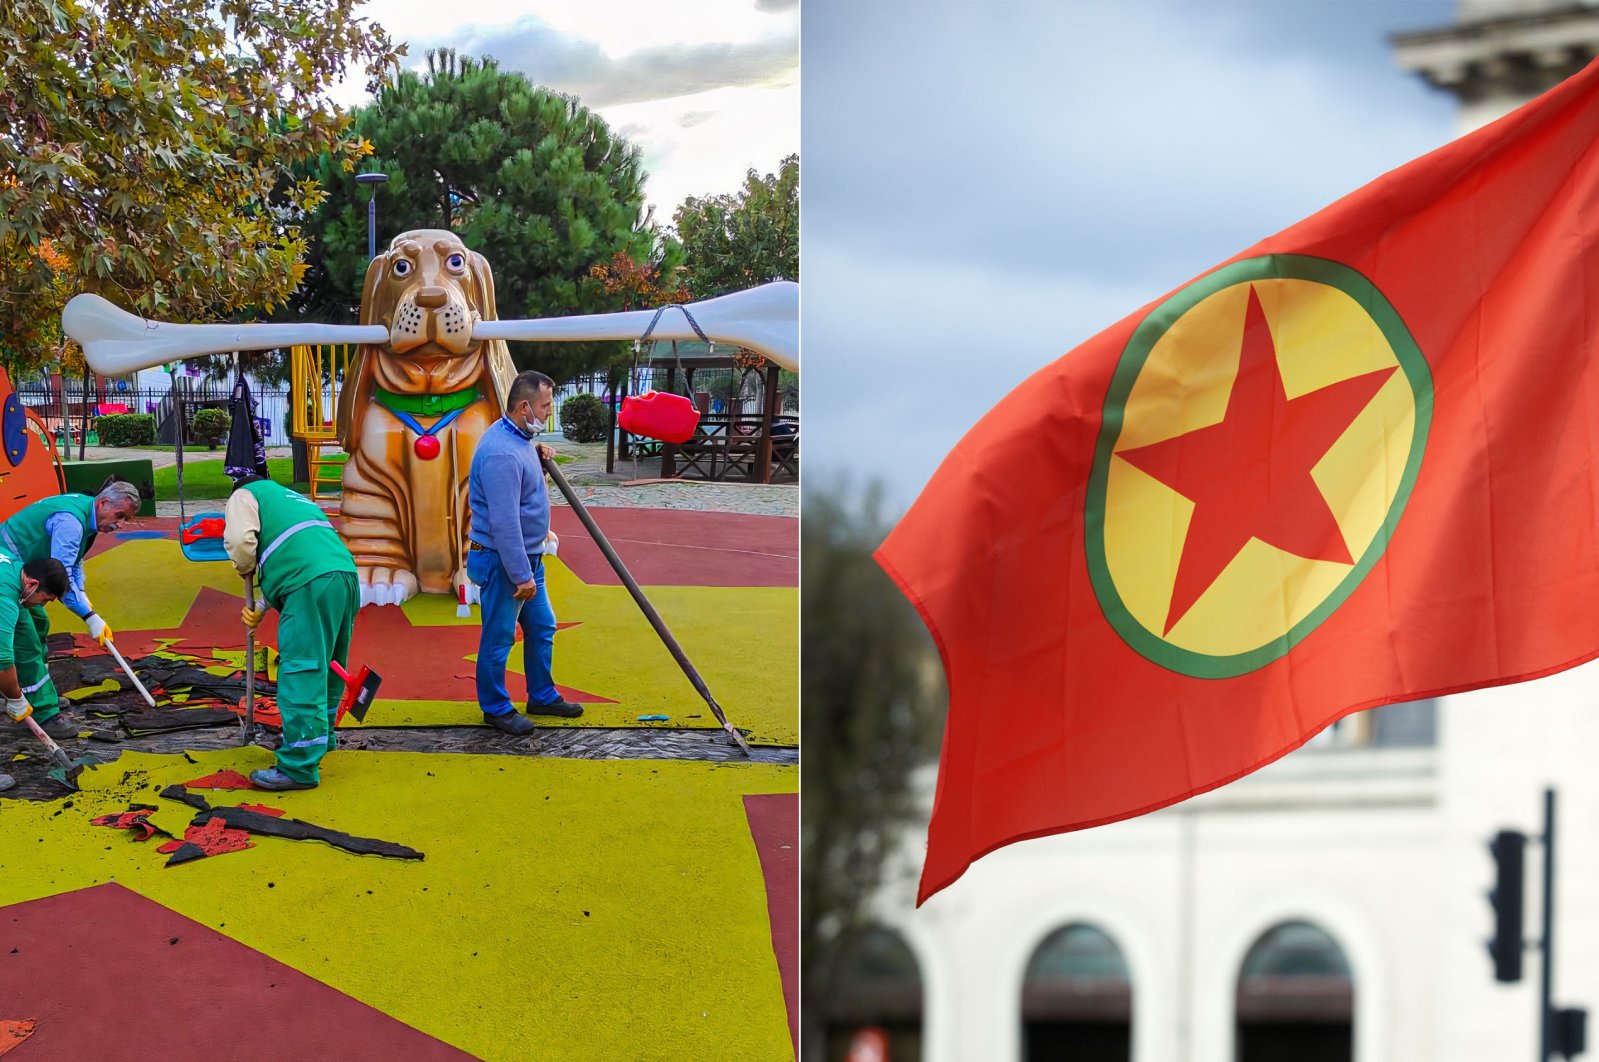 In this combined photo, construction workers remove the flooring of a playground, which resembles the terrorist YPG/PKK flag in Istanbul's Küçükçekmece district on Wednesday, Nov. 11, 2020, while the right photo features the YPG/PKK terrorist flag (AA and Getty Images) 